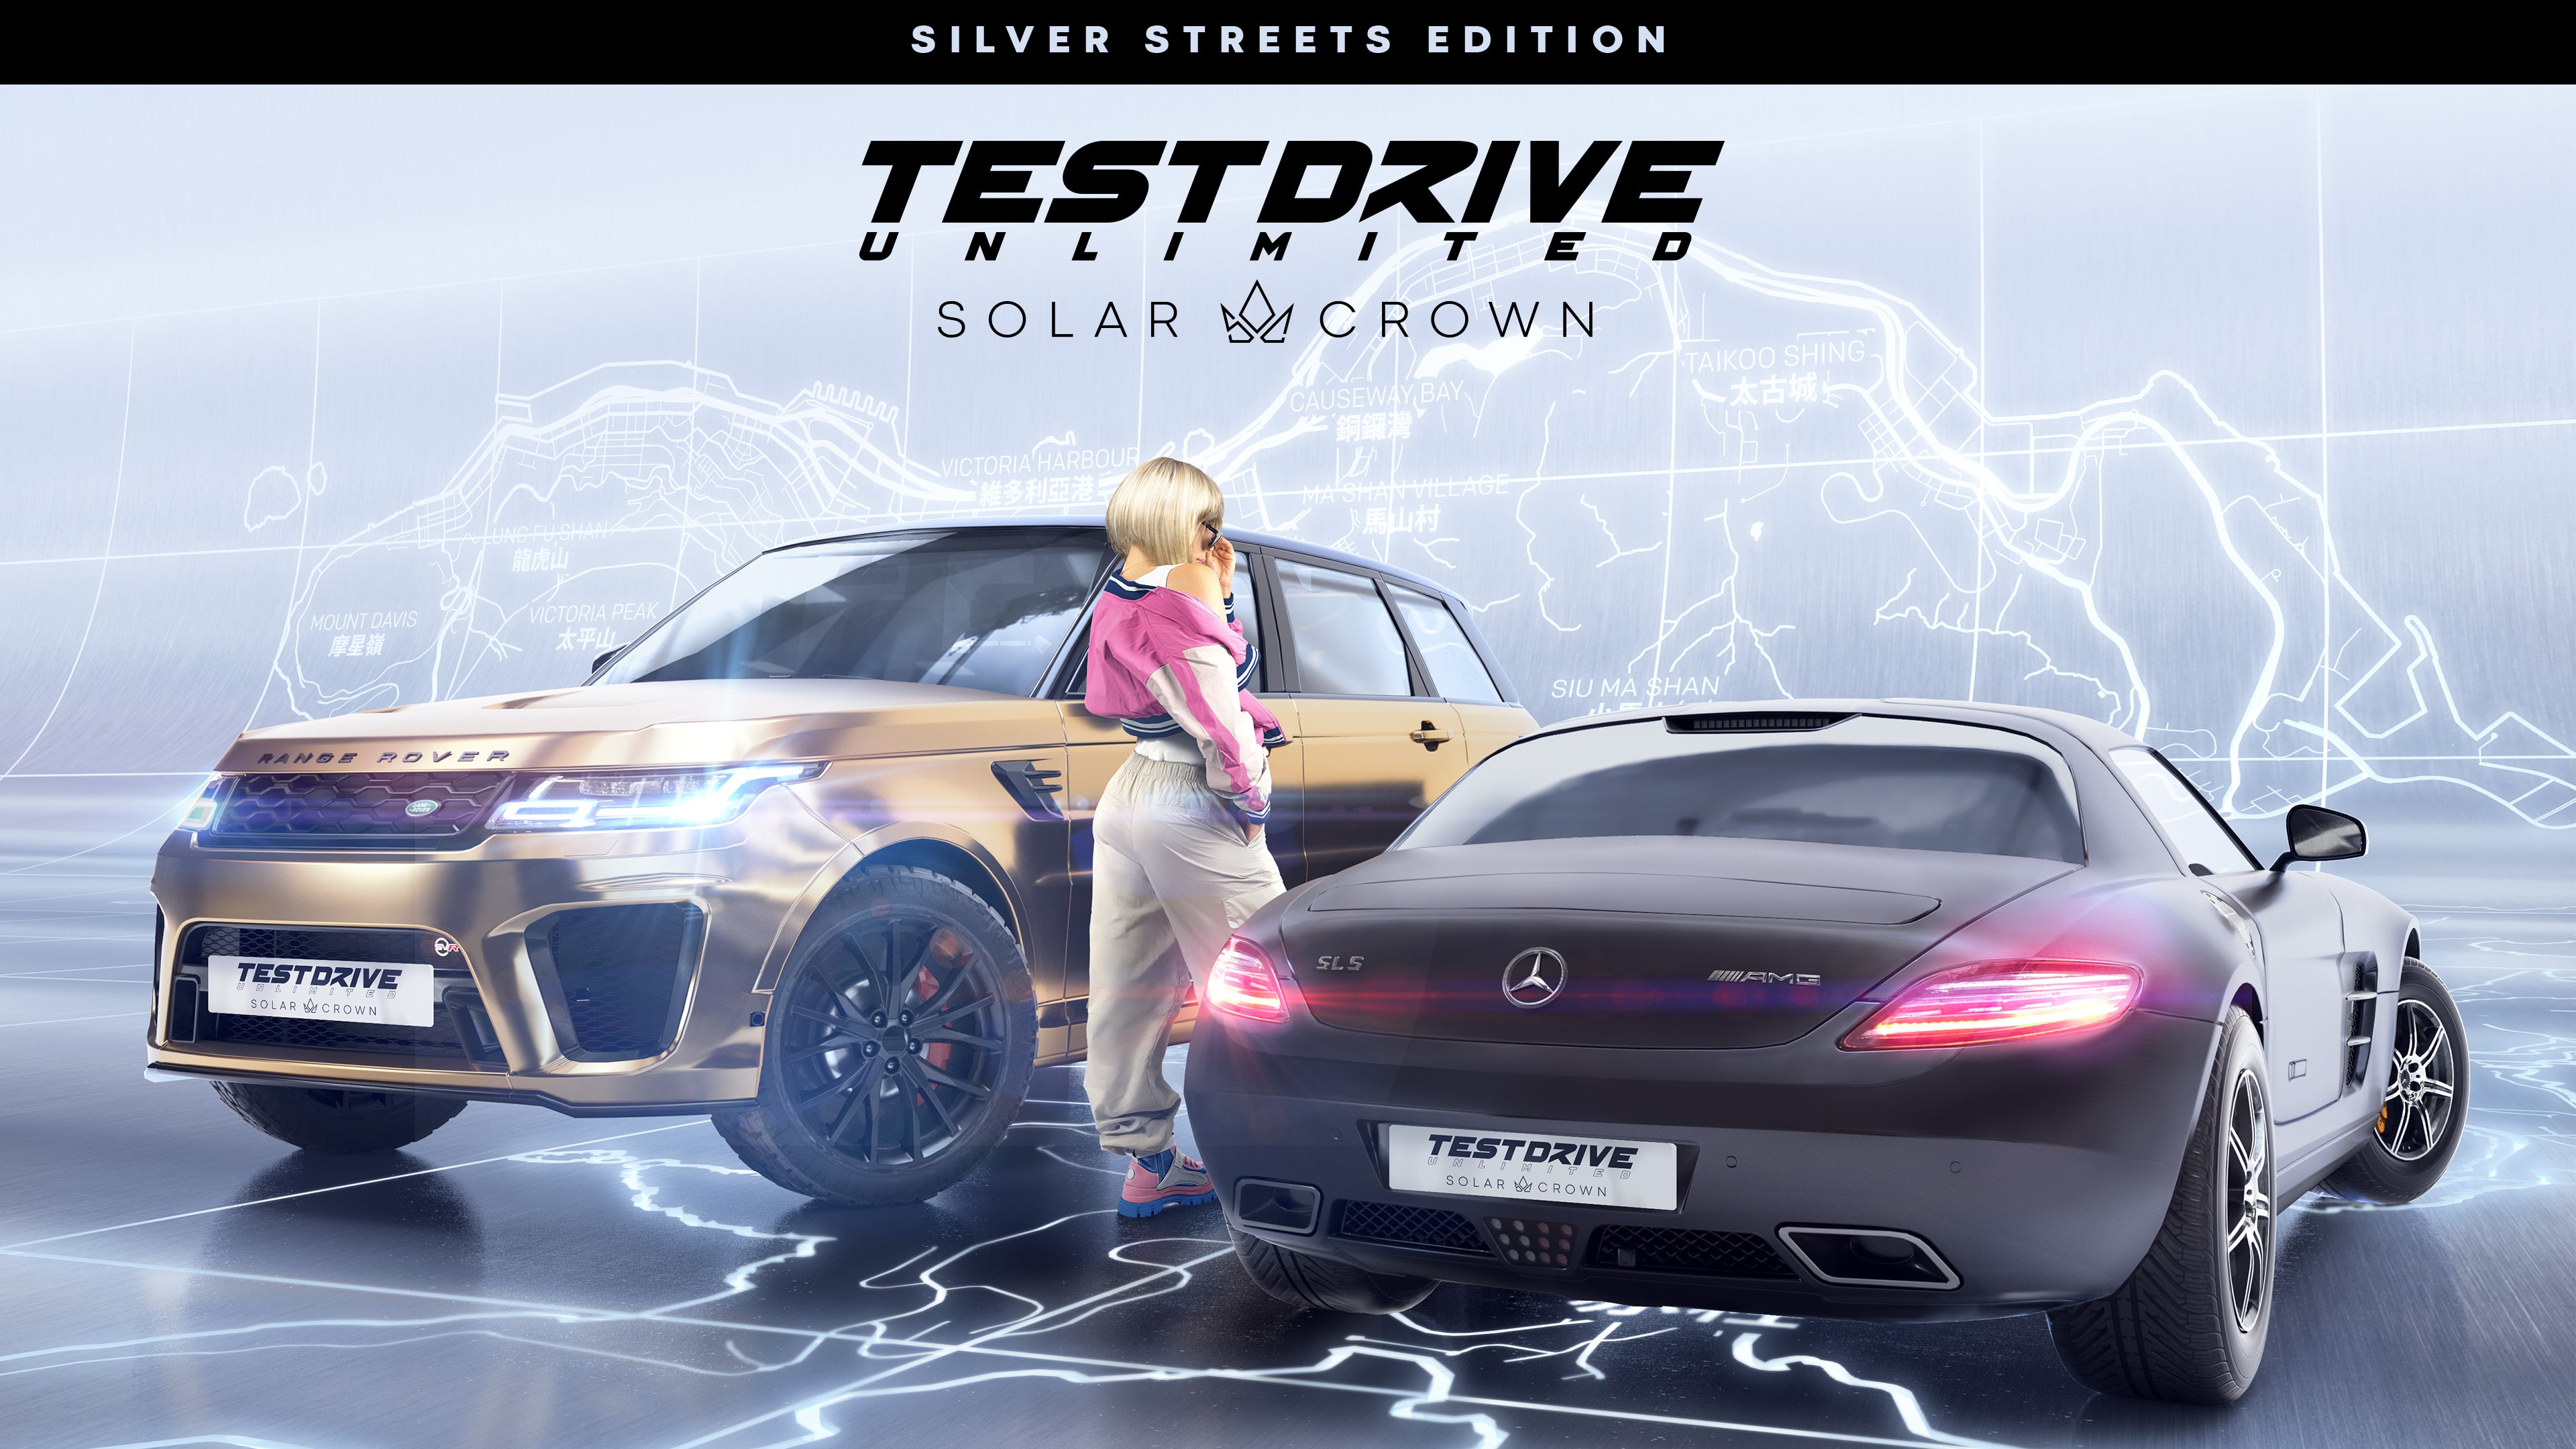 Silver Streets Edition